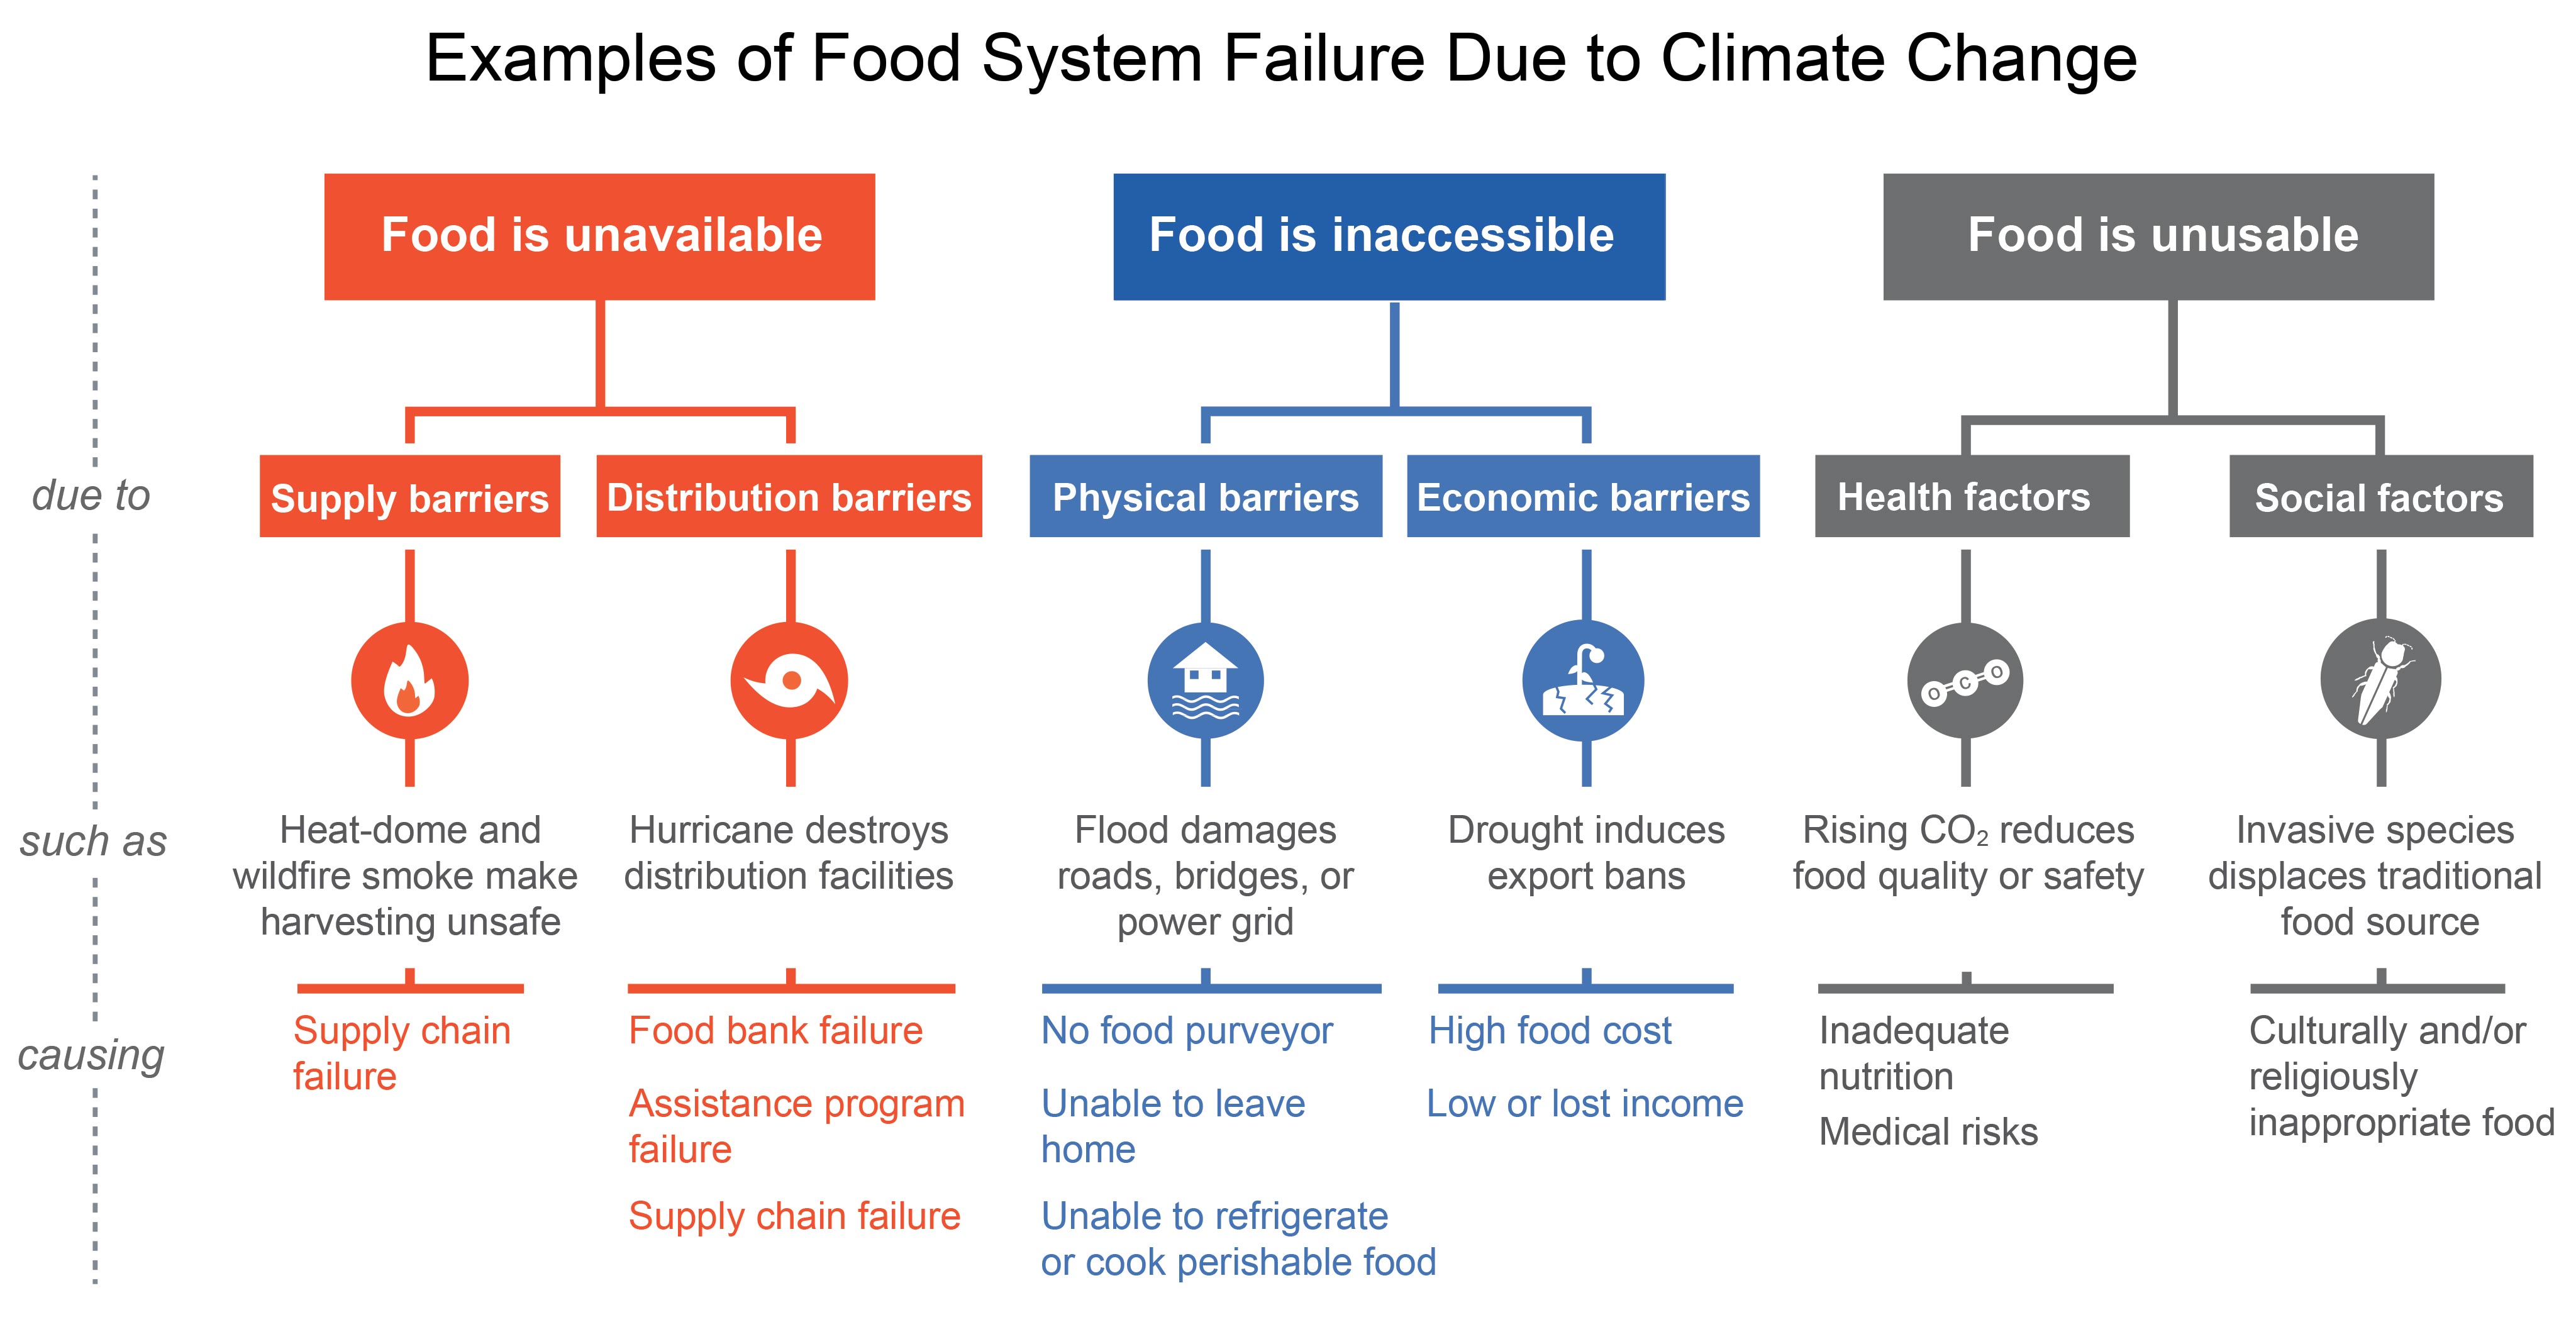 Examples of Food System Failure Due to Climate Change